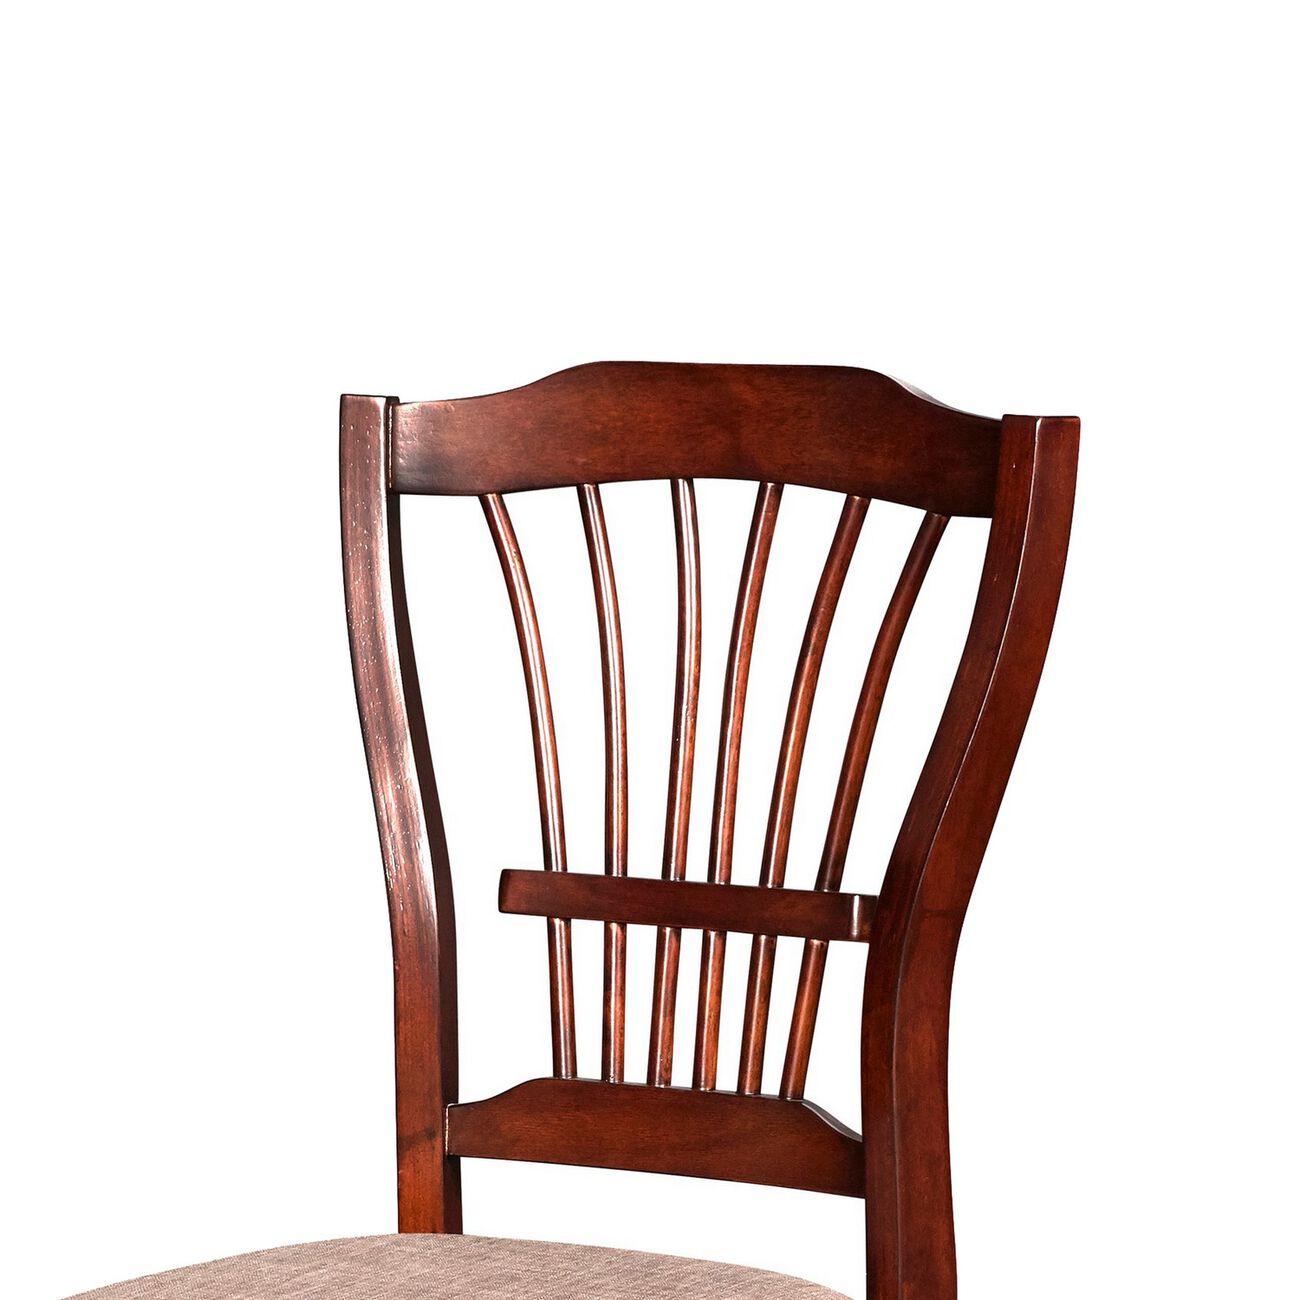 Slatted Back Wooden Dining Chair with Nailhead Trim, Set of 2, Brown